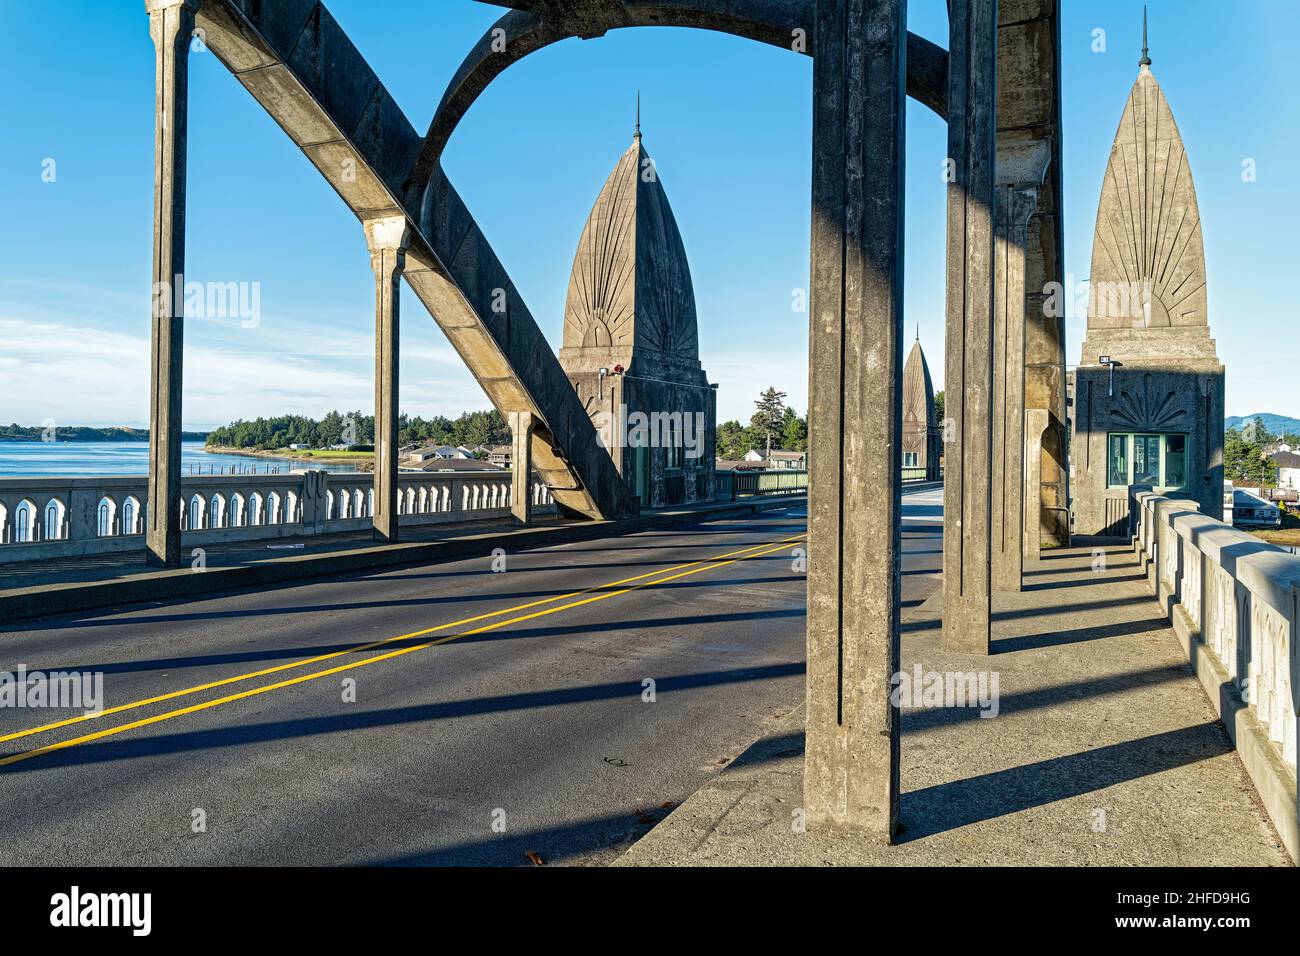 The obelisks and arches on the Siuslaw River Bridge, Florence, Oregon, US Stock Photo